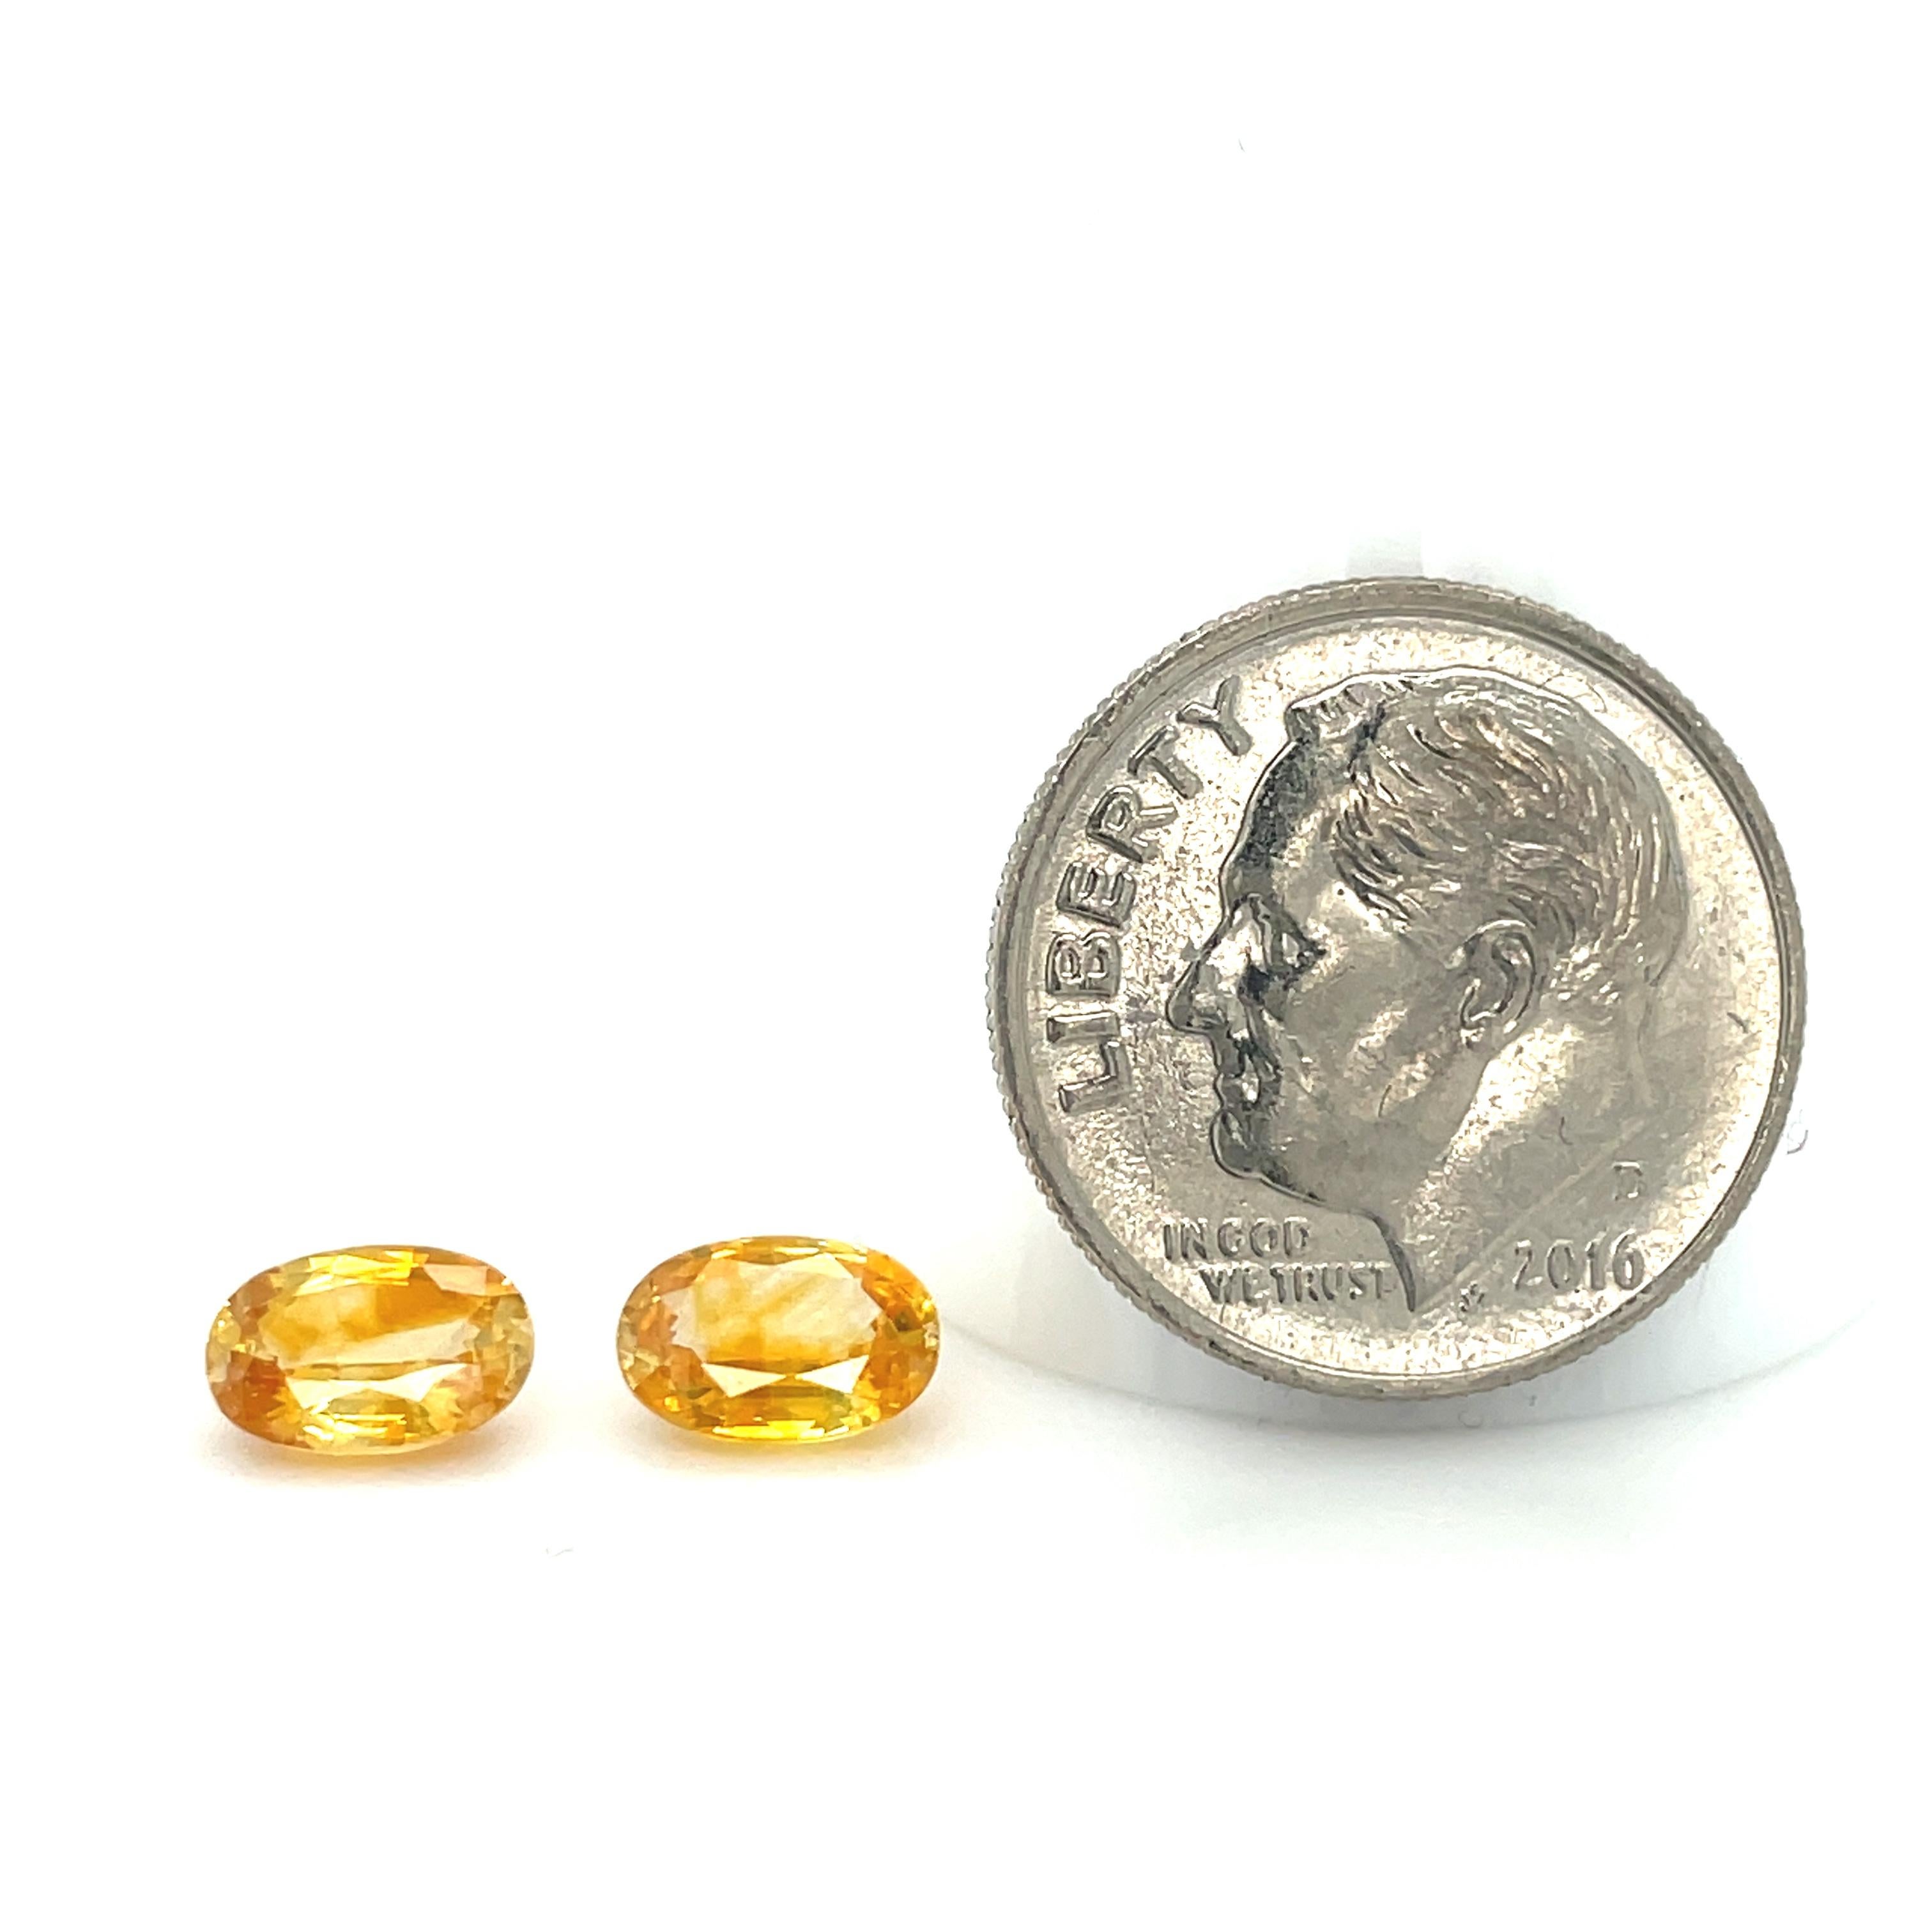 1.92 Carat Total Oval Yellow Sapphire Pair for Earrings, Loose Gemstones For Sale 1